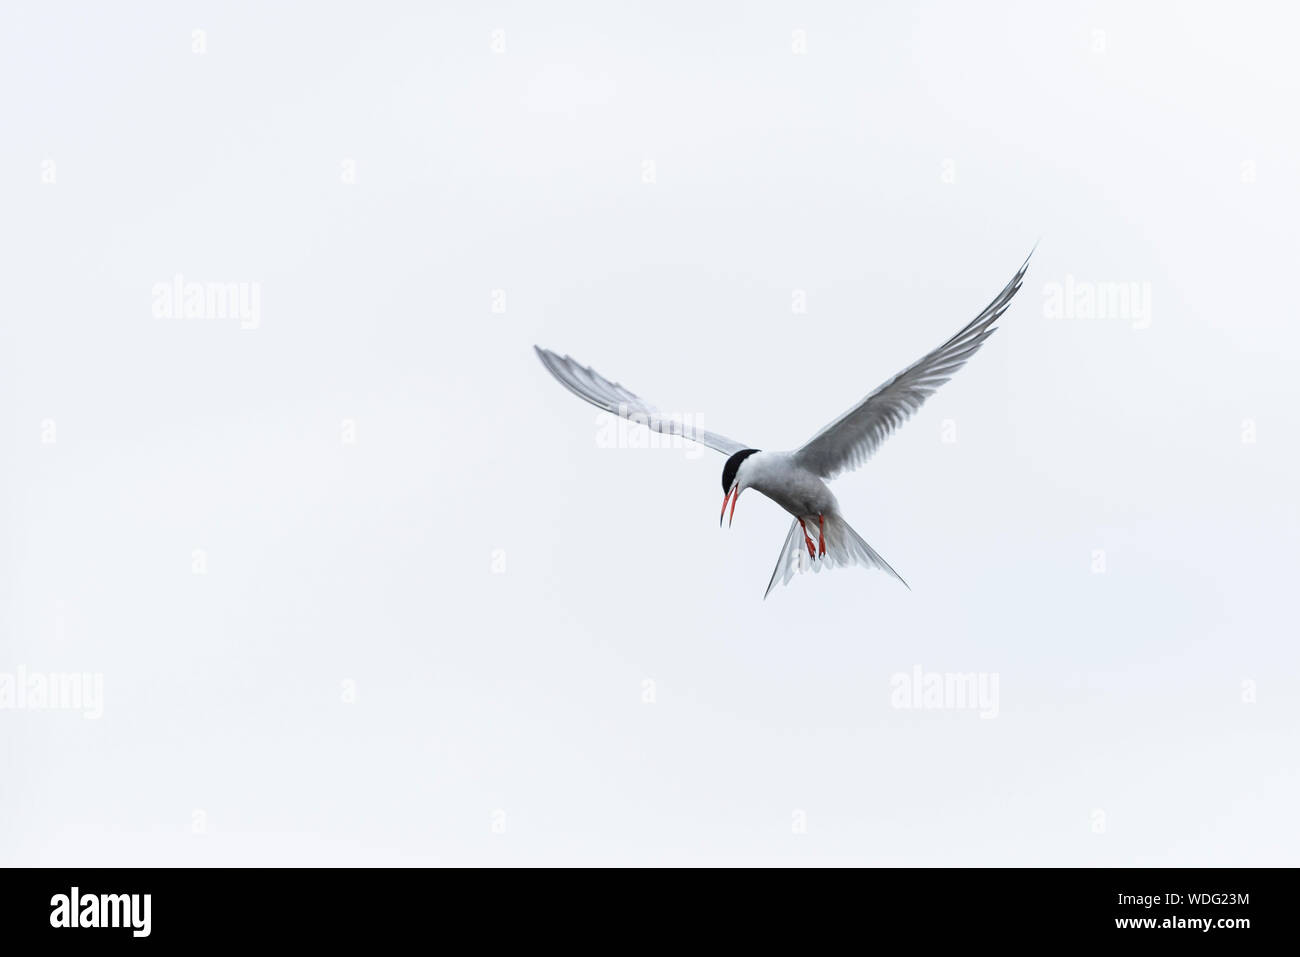 Common Terns, Sterna hirundo, at Greenwich Ecology park. Hovering against a white sky. Stock Photo